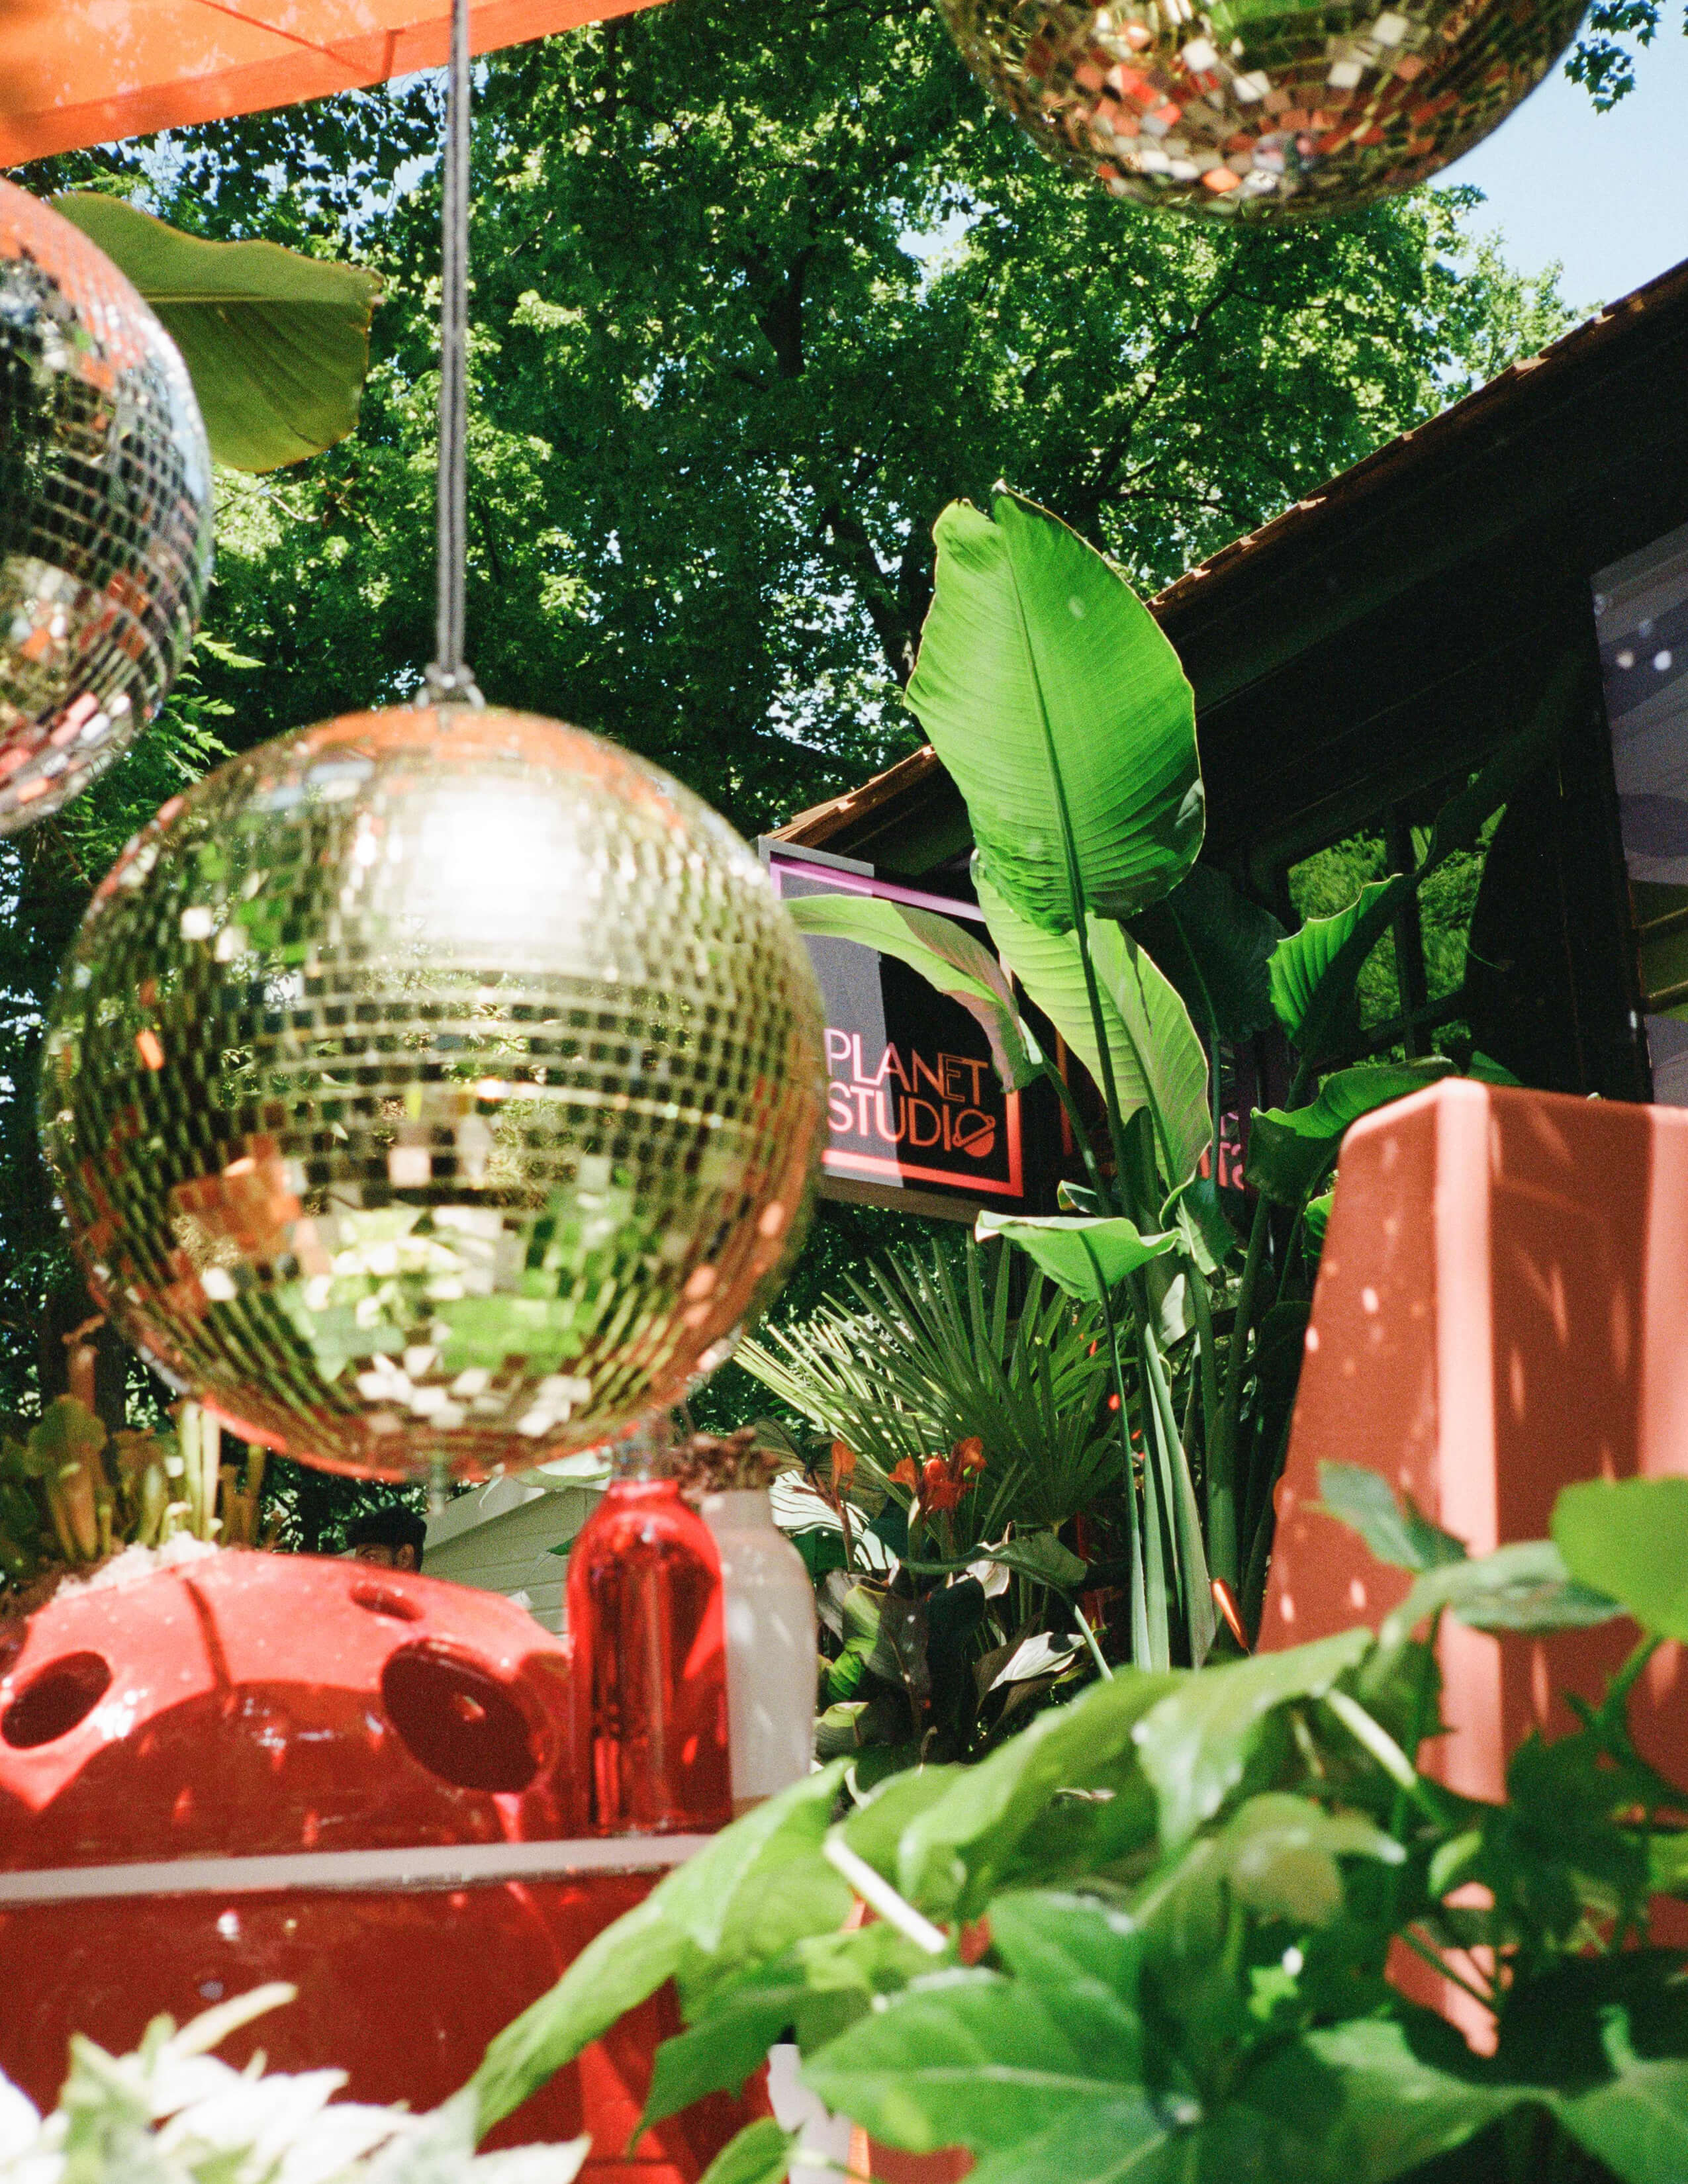 A disco ball is surrounded by various kinds of plants while the shop sign is in the distance.